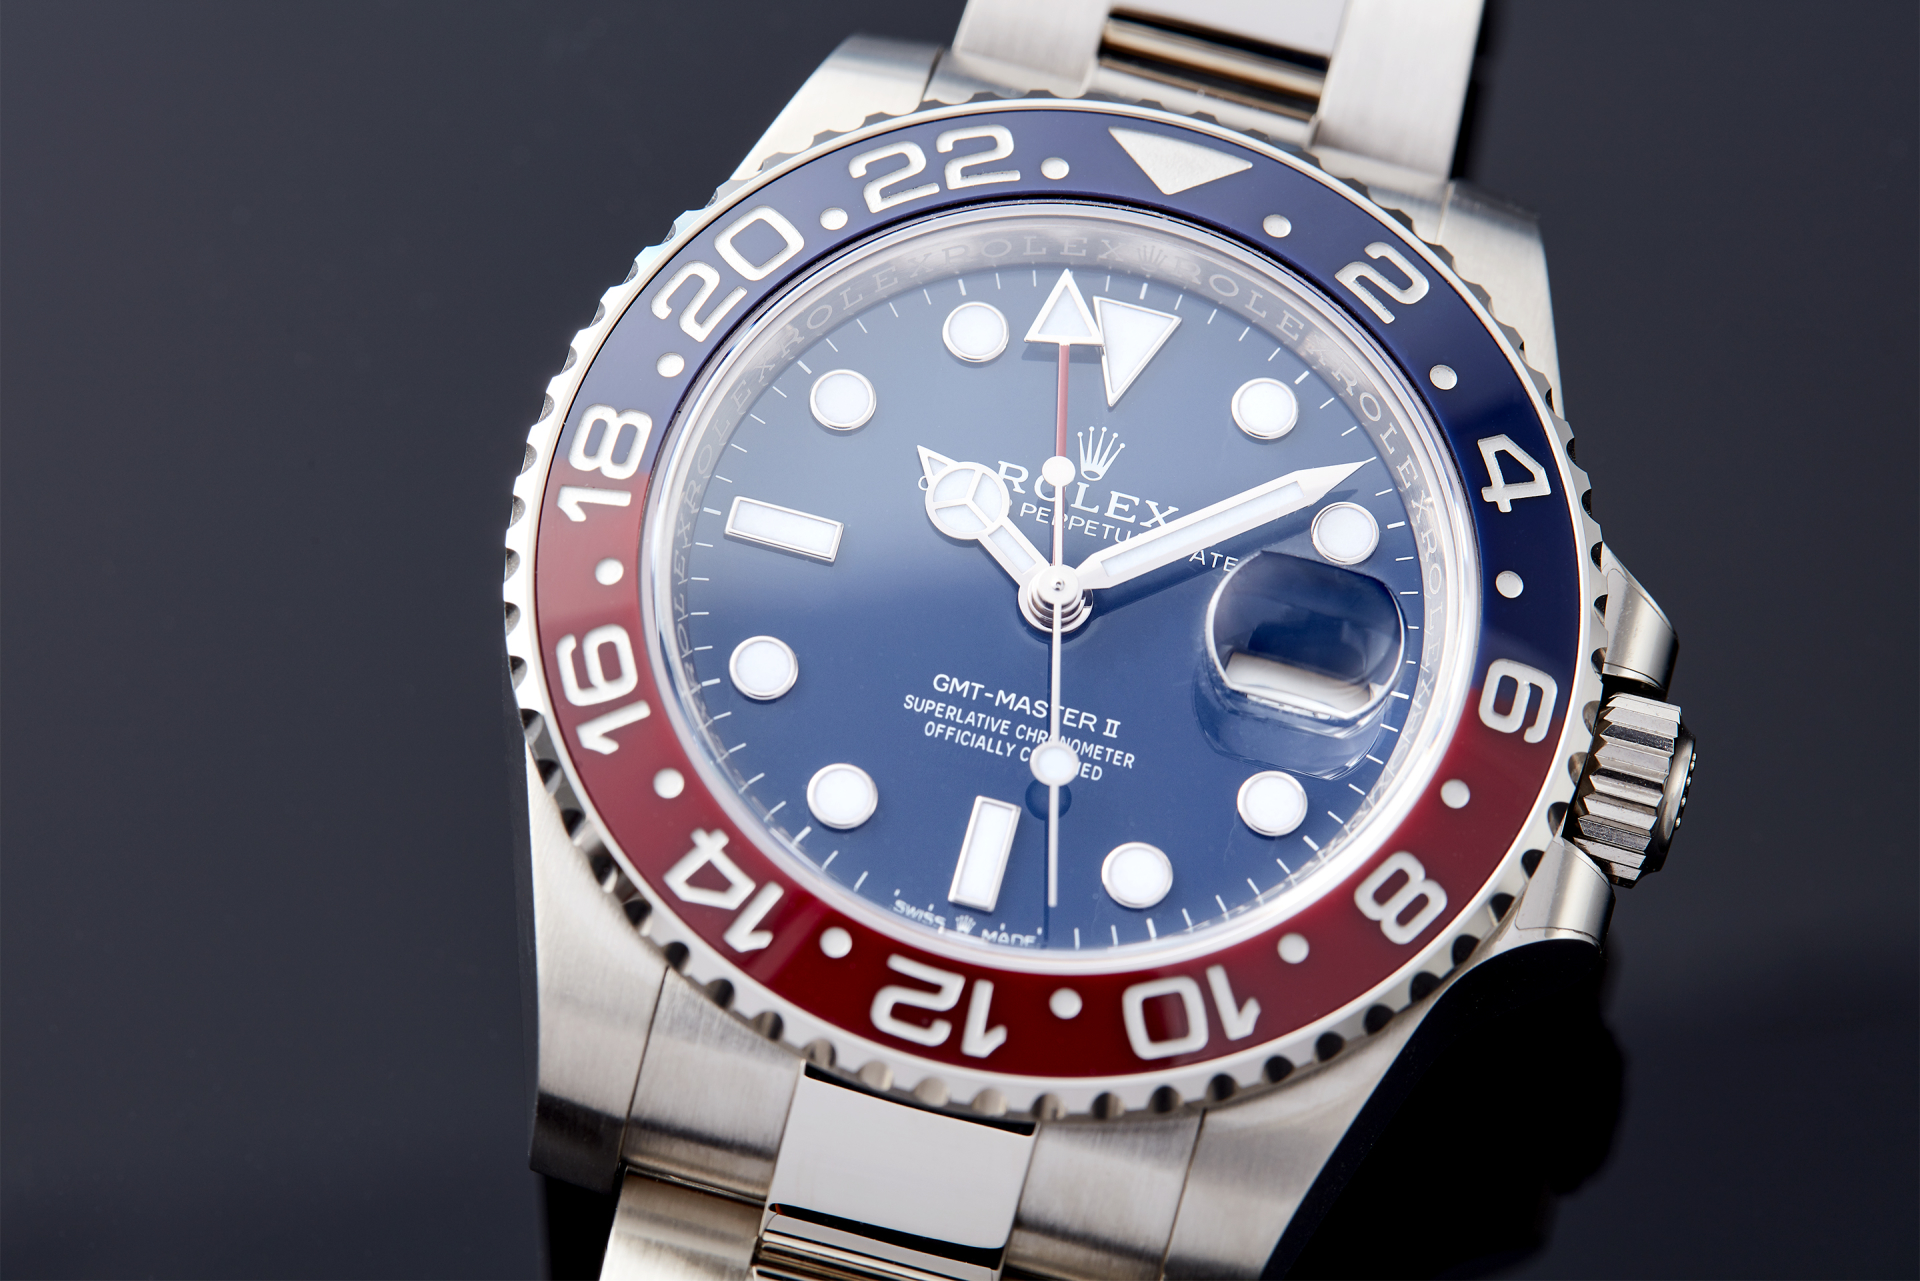 Price development of the Rolex GMT-Master 2: Opportunities for old and new models